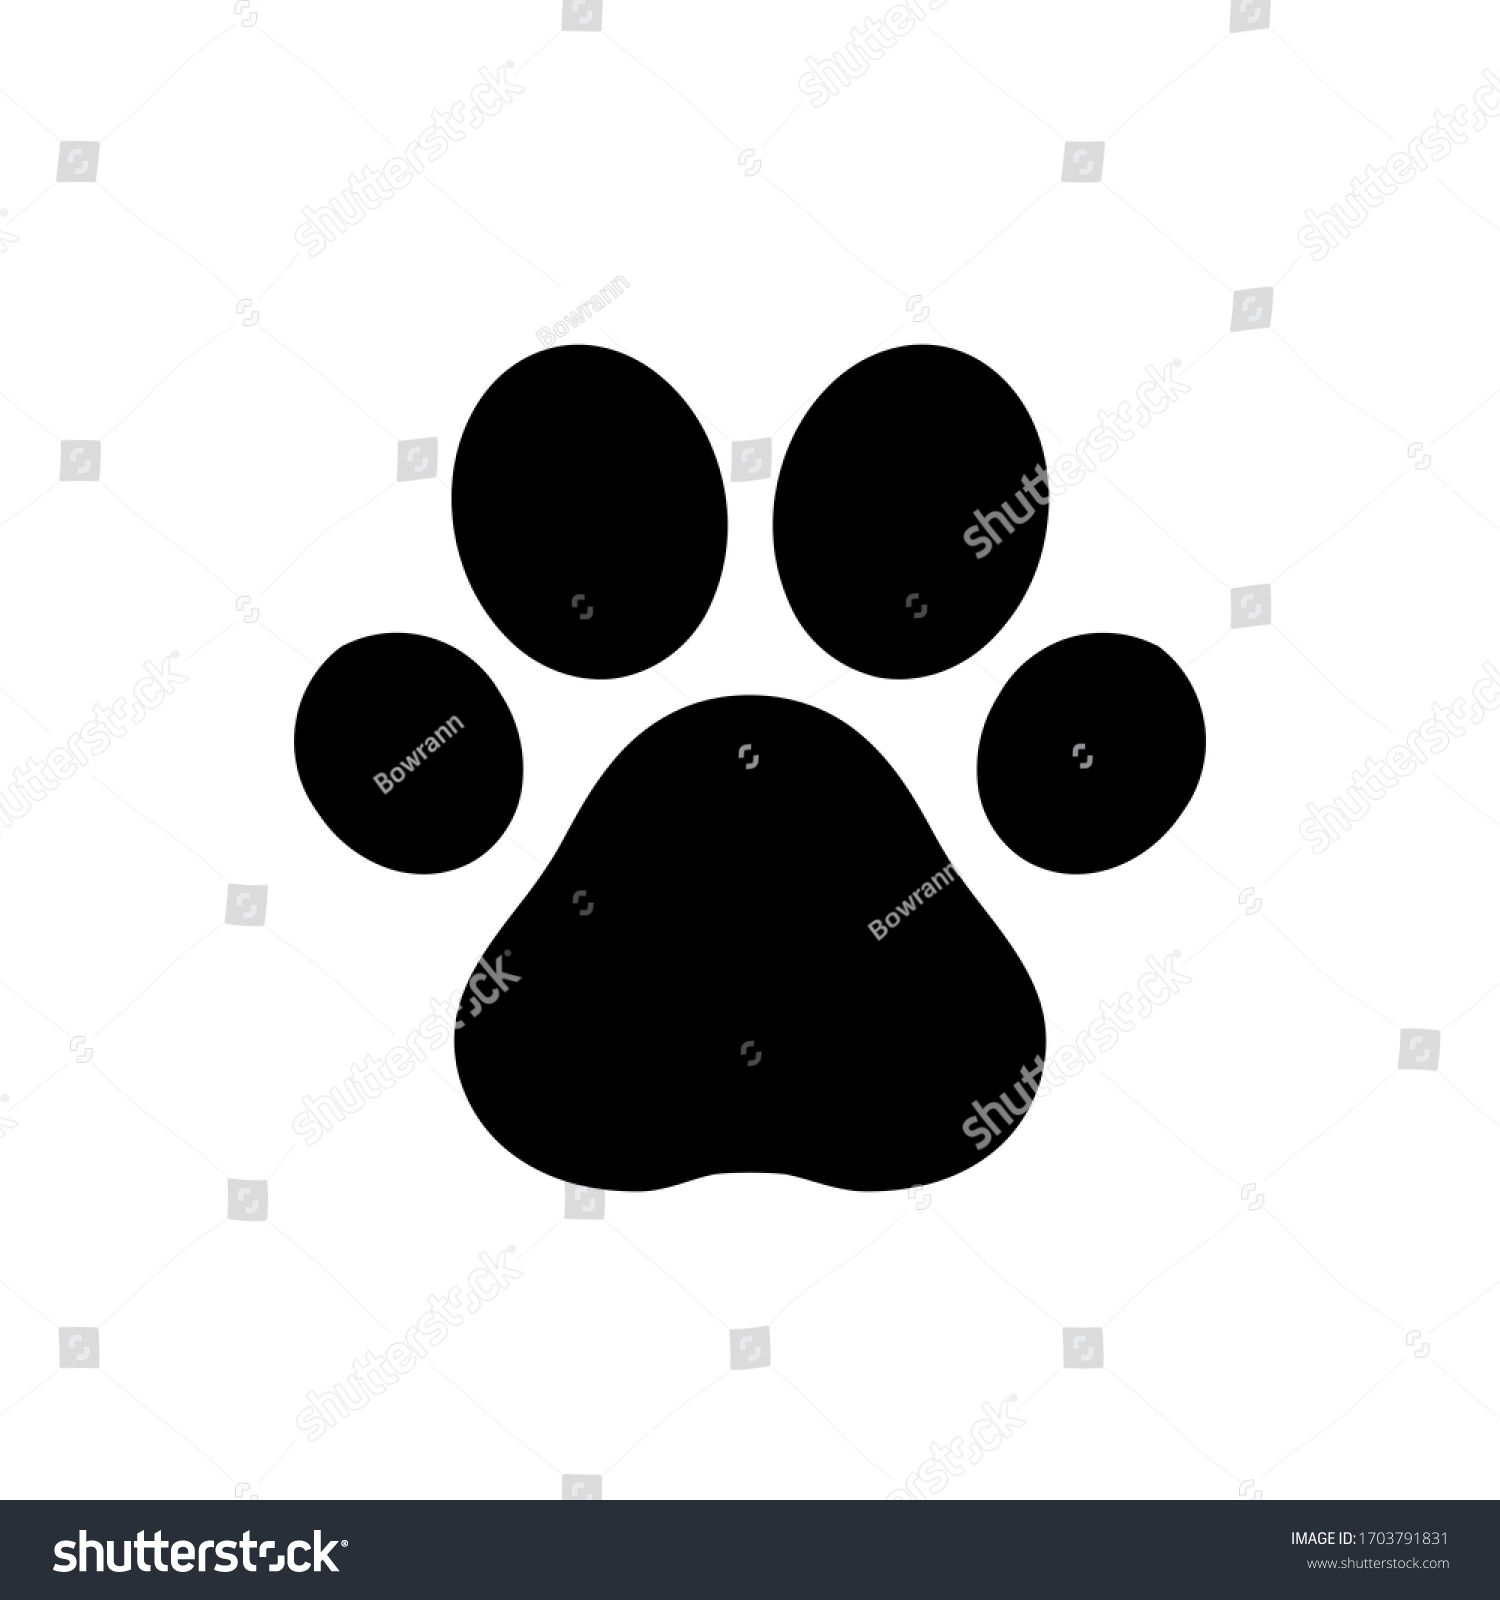 SVG of Paw print icon,vector illustration. Flat design style. vector paw print icon illustration isolated on White background, paw print icon Eps10. paw print icons graphic design vector symbols. svg